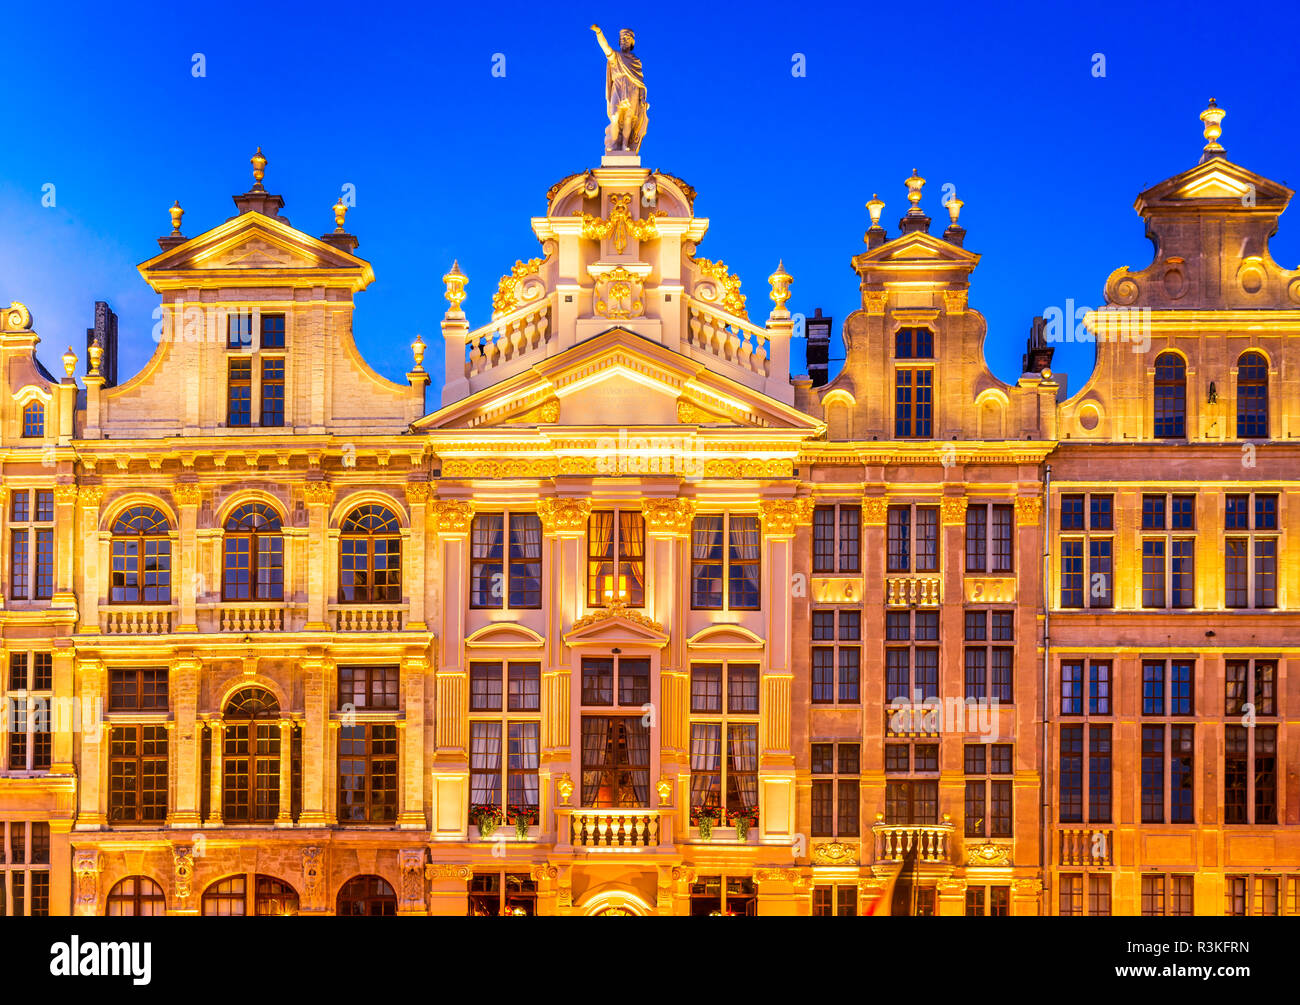 Bruxelles, Belgium. Night image with medieval architecture in Grand Place (Grote Markt). Stock Photo